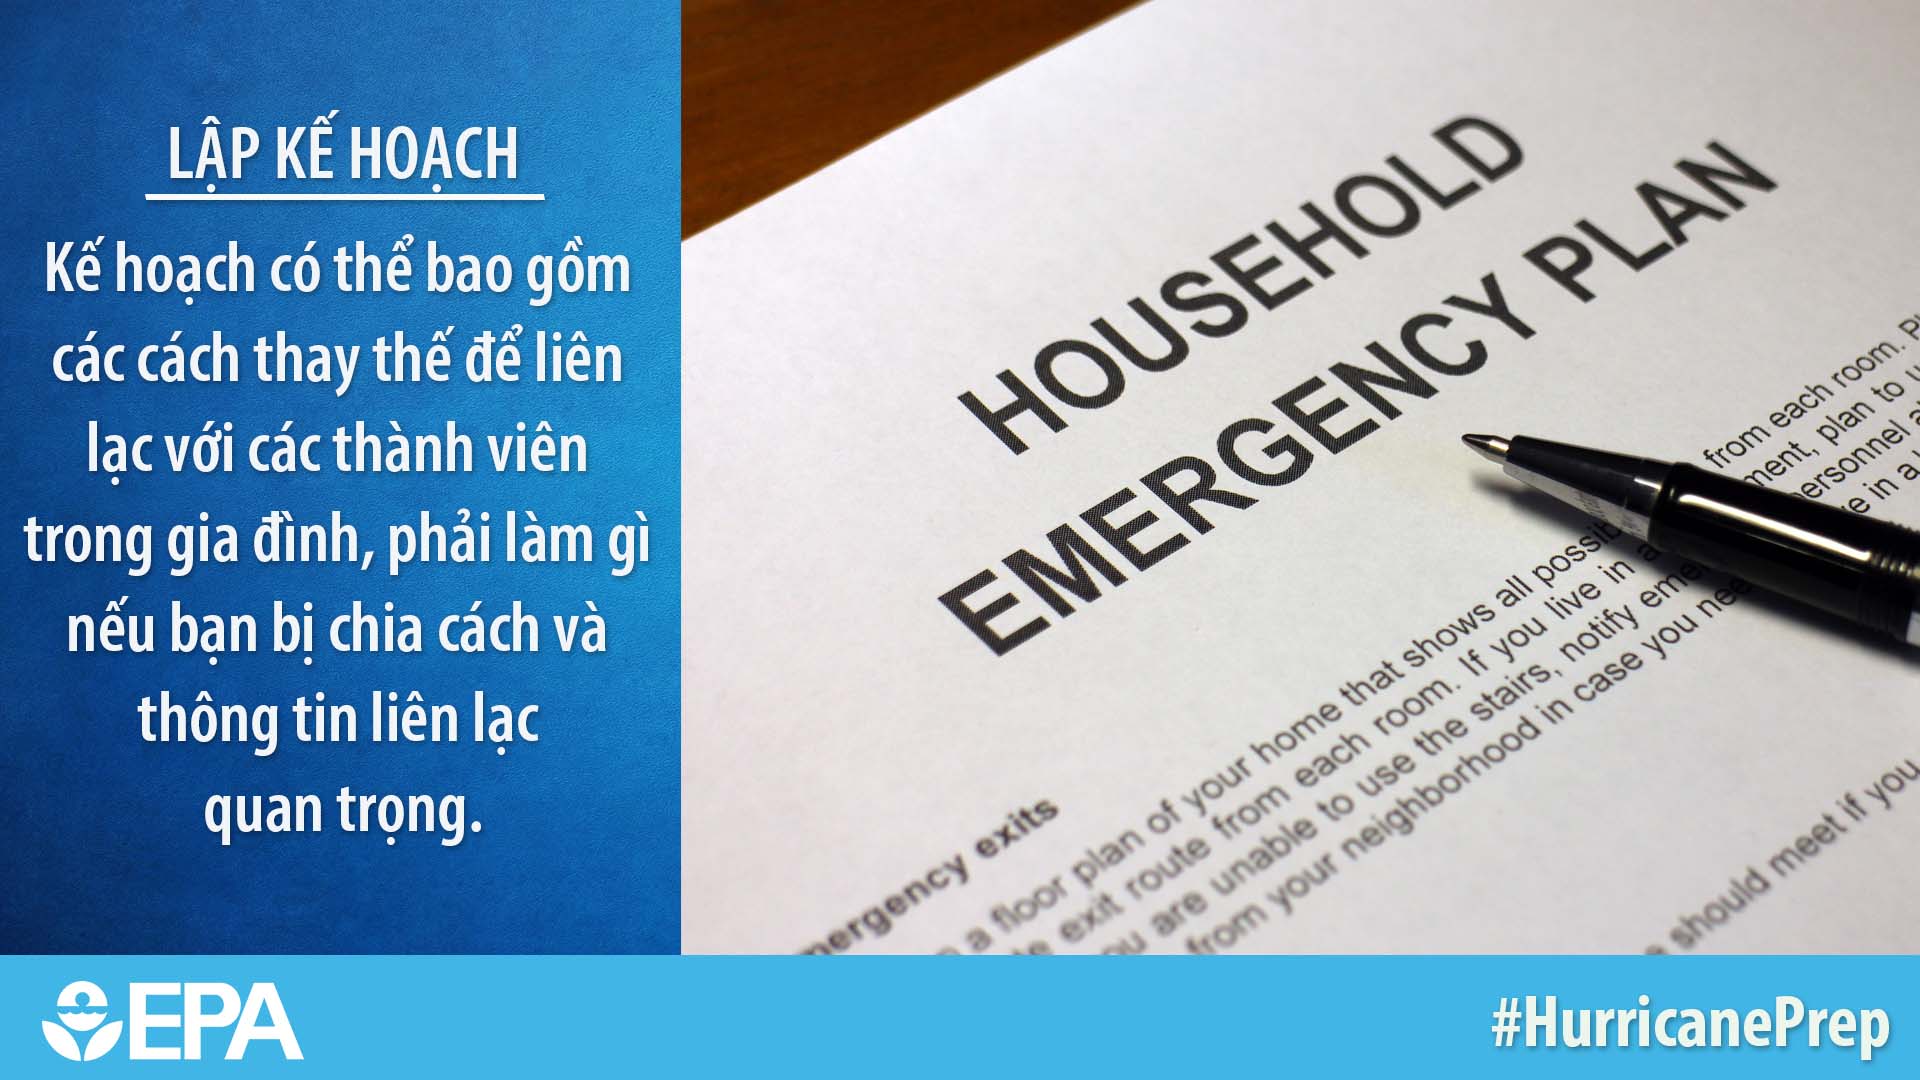 Vietnamese text and photo on making a household emergency plan